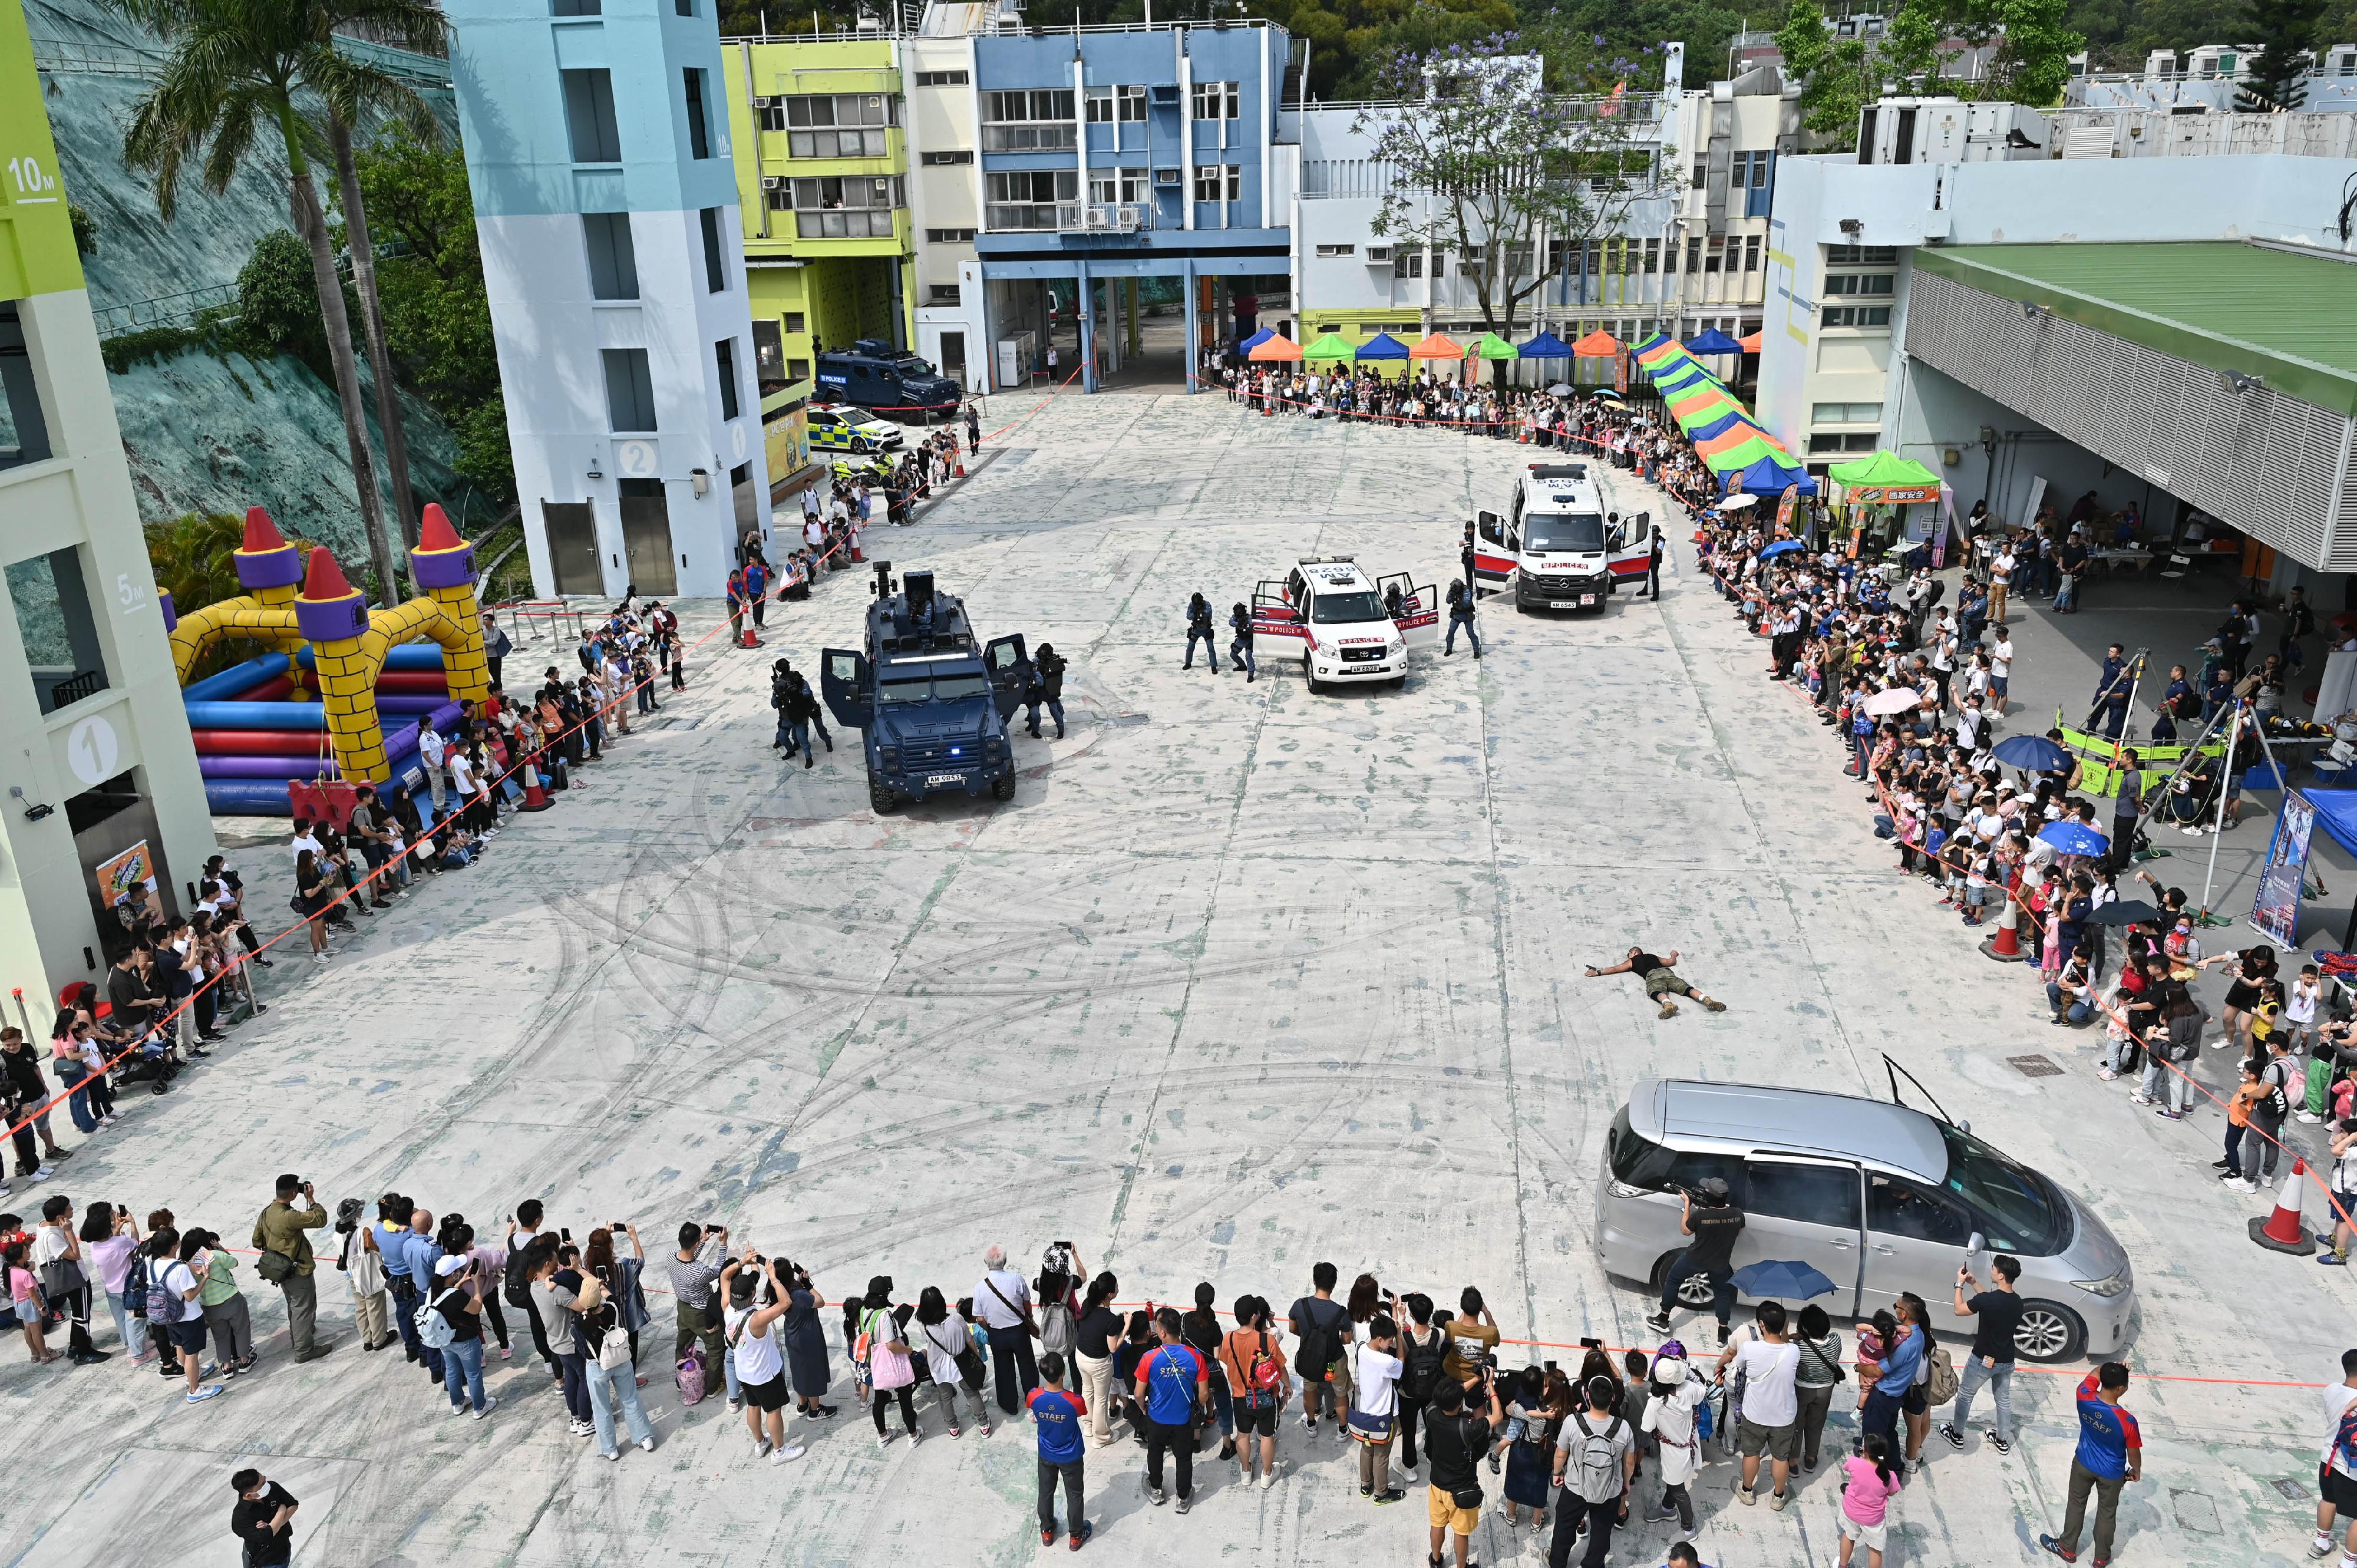 The Public Relations Wing of the Hong Kong Police Force organised the “JPC@PH Fun Day” at the Junior Police Call Permanent Activity Centre on April 22 and 23. Photo shows demonstration by the Counter Terrorism Response Unit.